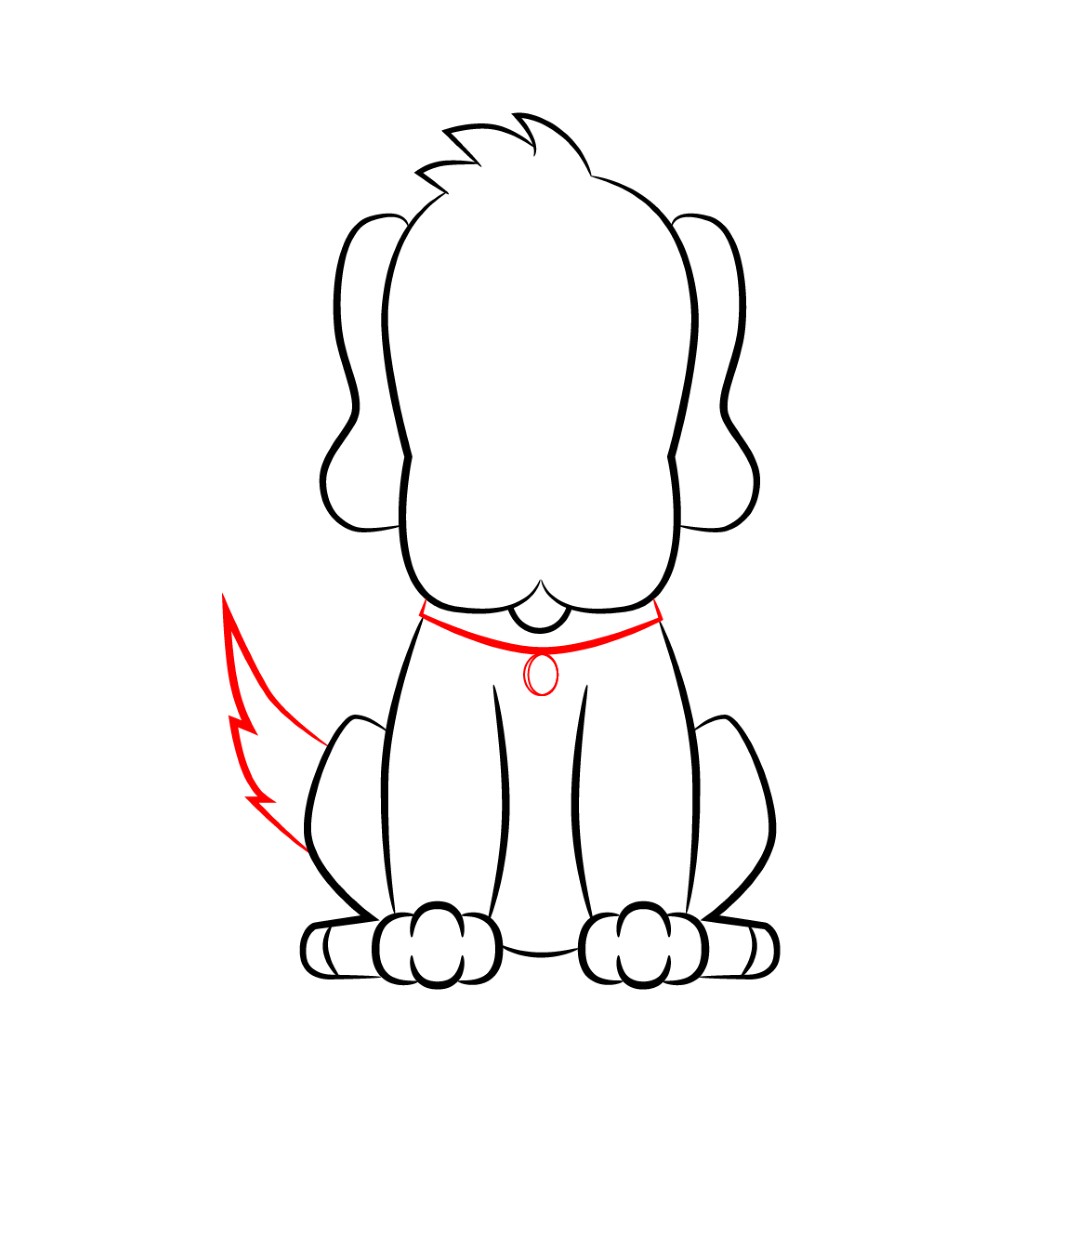 How To Draw A Cartoon Dog - Draw Central